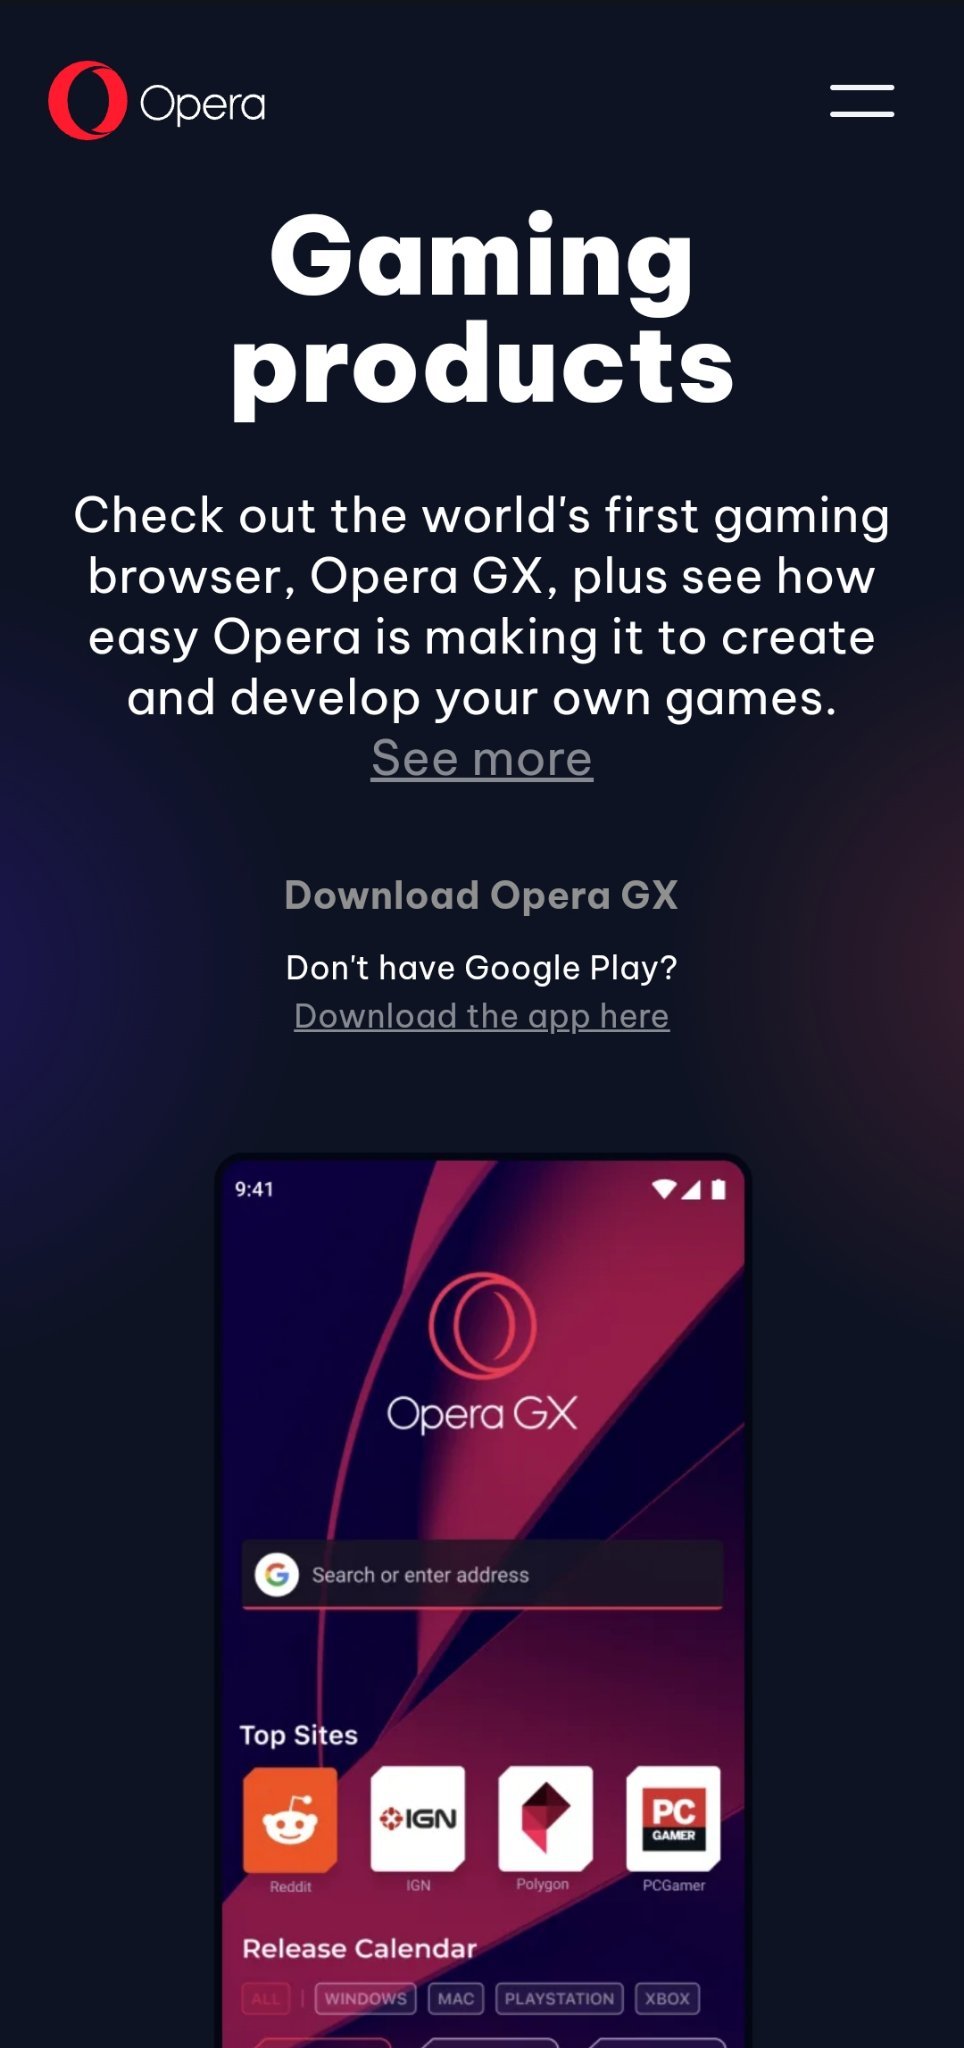 $Opera (OPRA.US)$ release new product for the gaming industry intent to gain more market share.